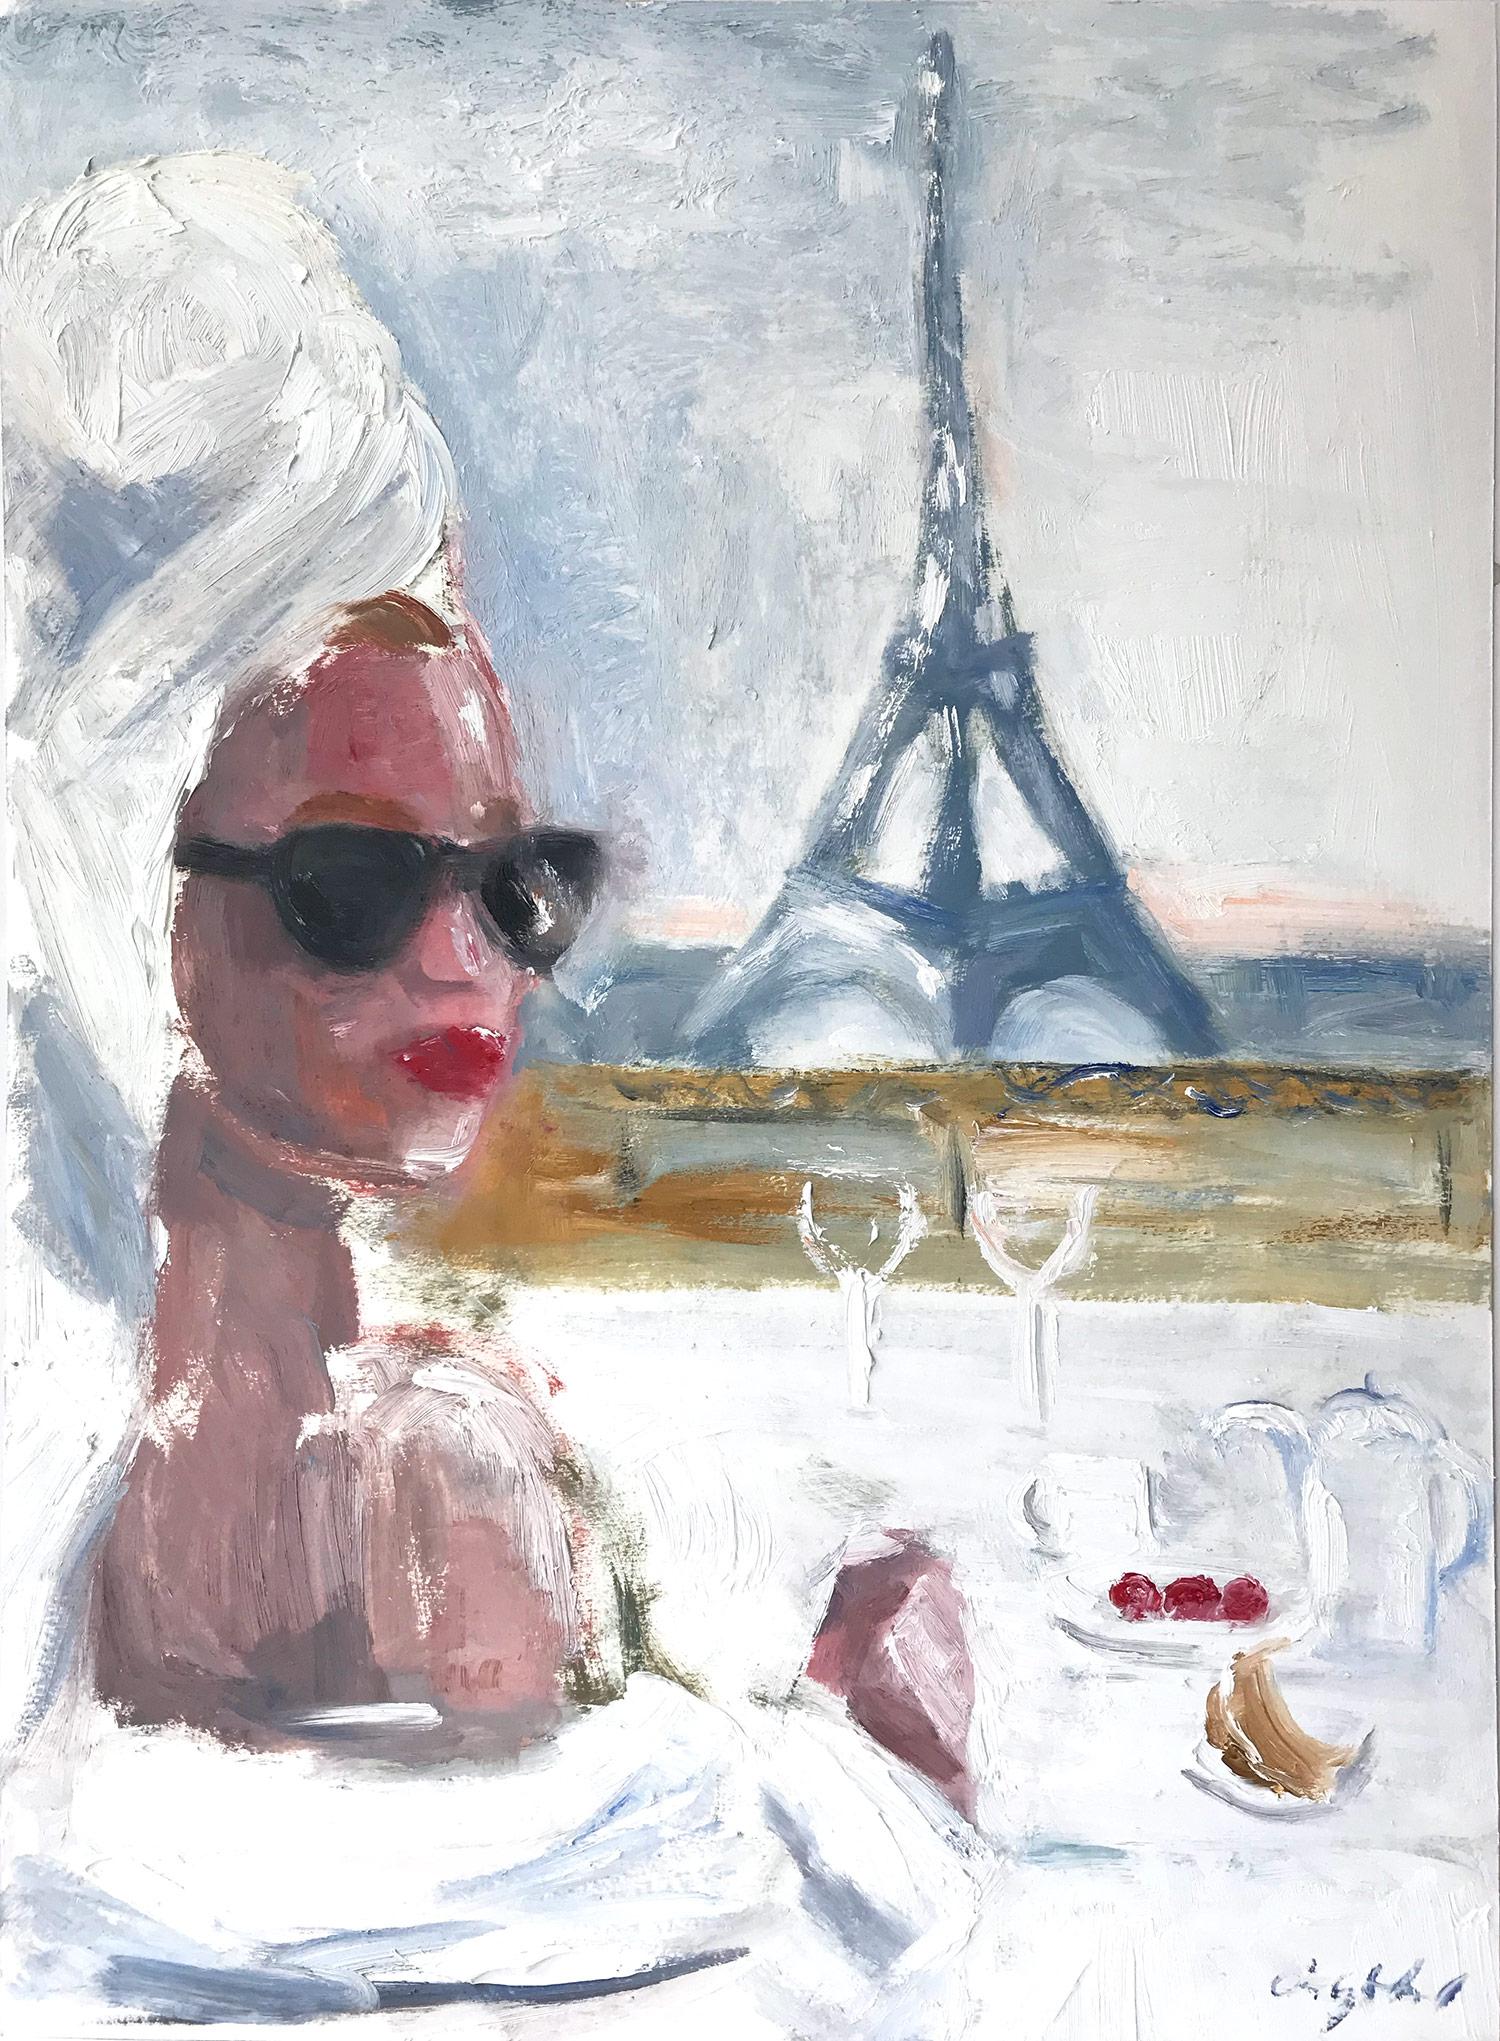 Cindy Shaoul Figurative Painting - "Paris is For Lovers" Oil Painting on Paper Breakfast by Eiffel Tower and Coffee